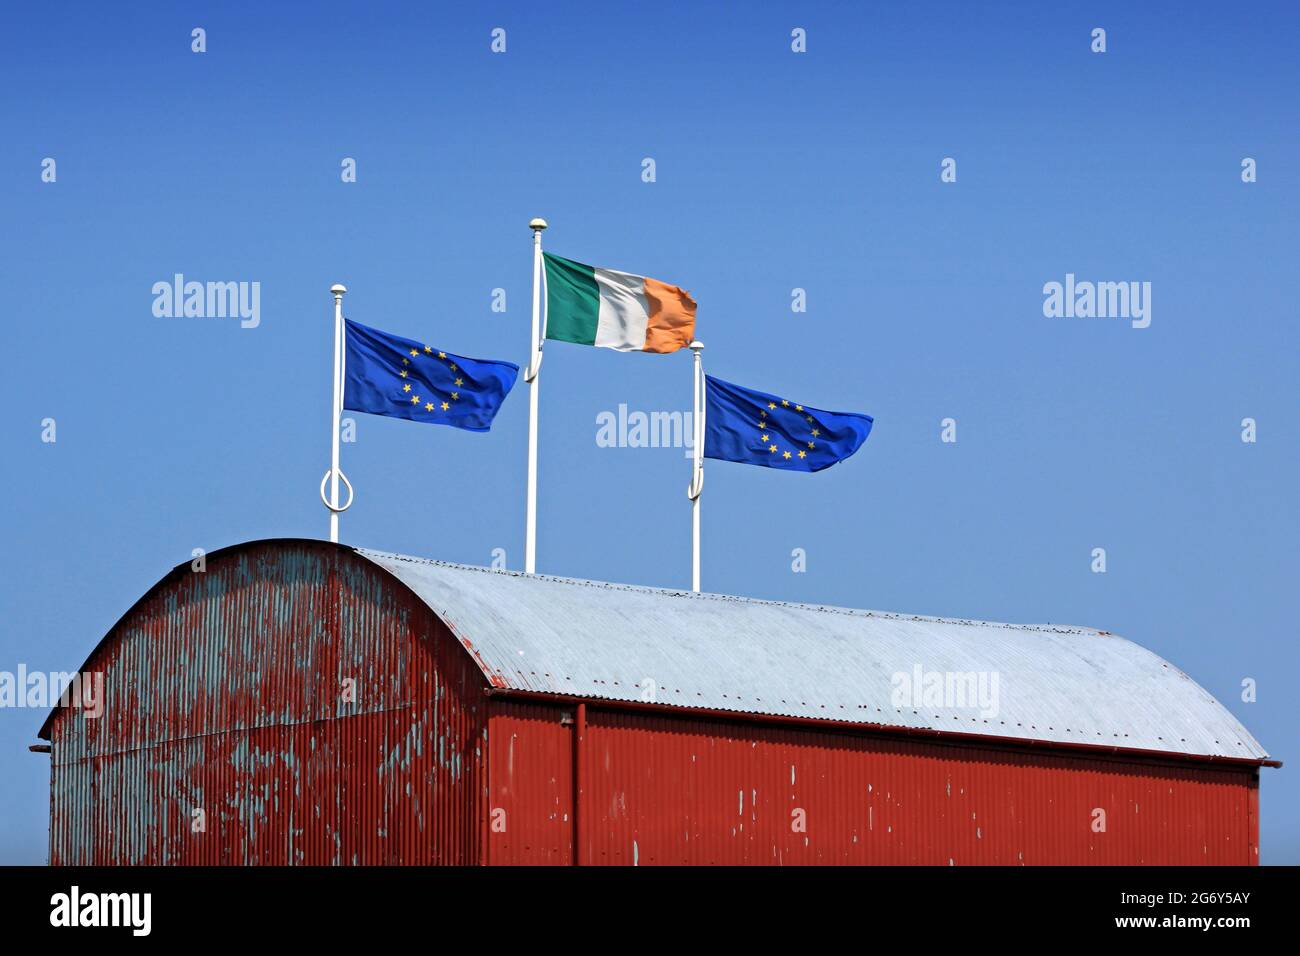 A red barn with European and an Irish flag, a metaphor on Euro and Irish farm issues. Stock Photo